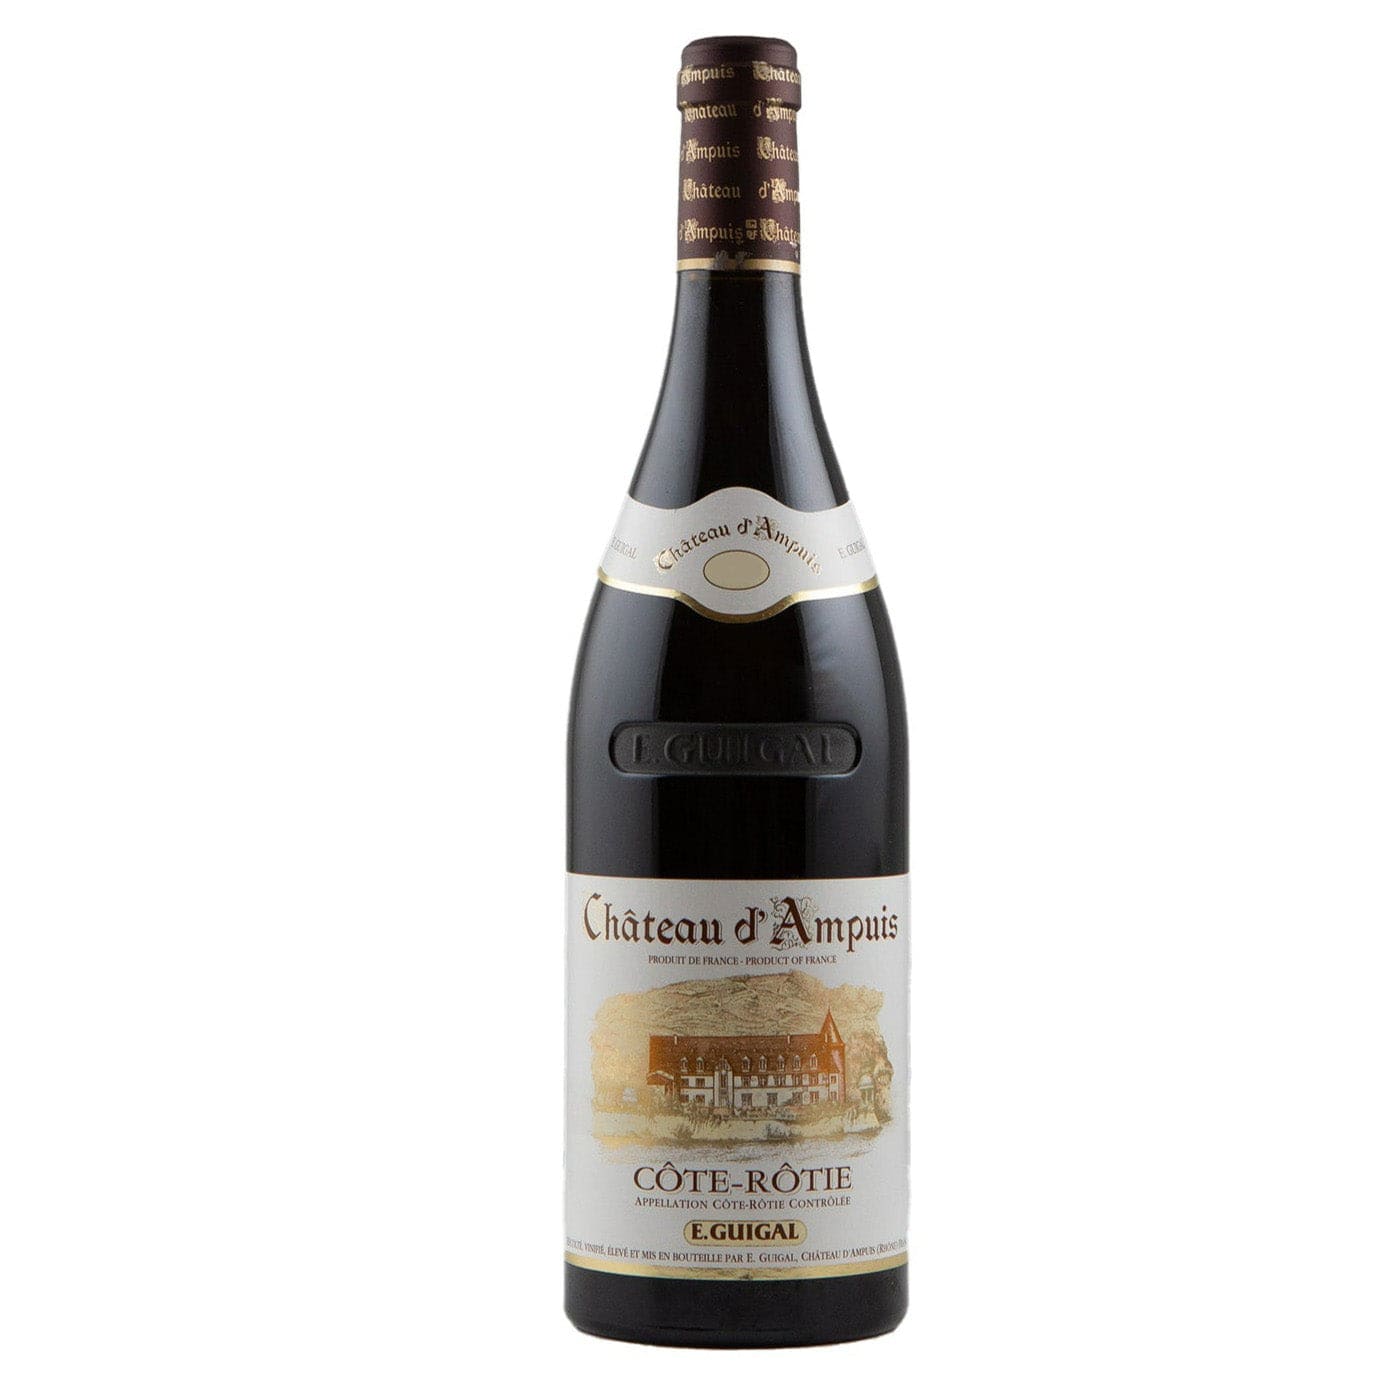 Single bottle of Red wine E. Guigal,  Chateau d'Ampuis, Cote Rotie, 2010 100% Syrah